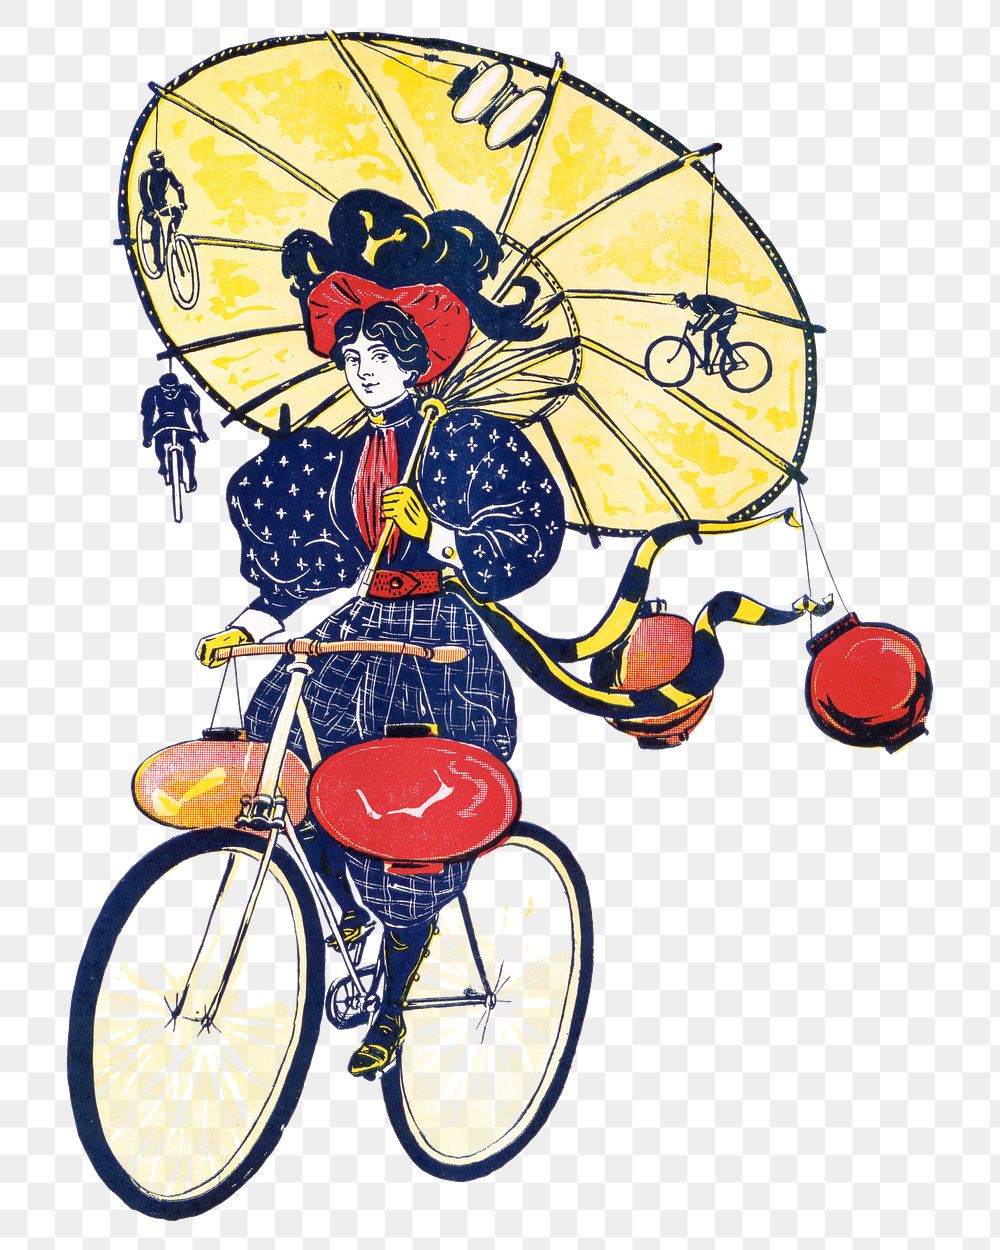 Vintage woman png sticker riding bicycle, transparent background.   Remixed by rawpixel.